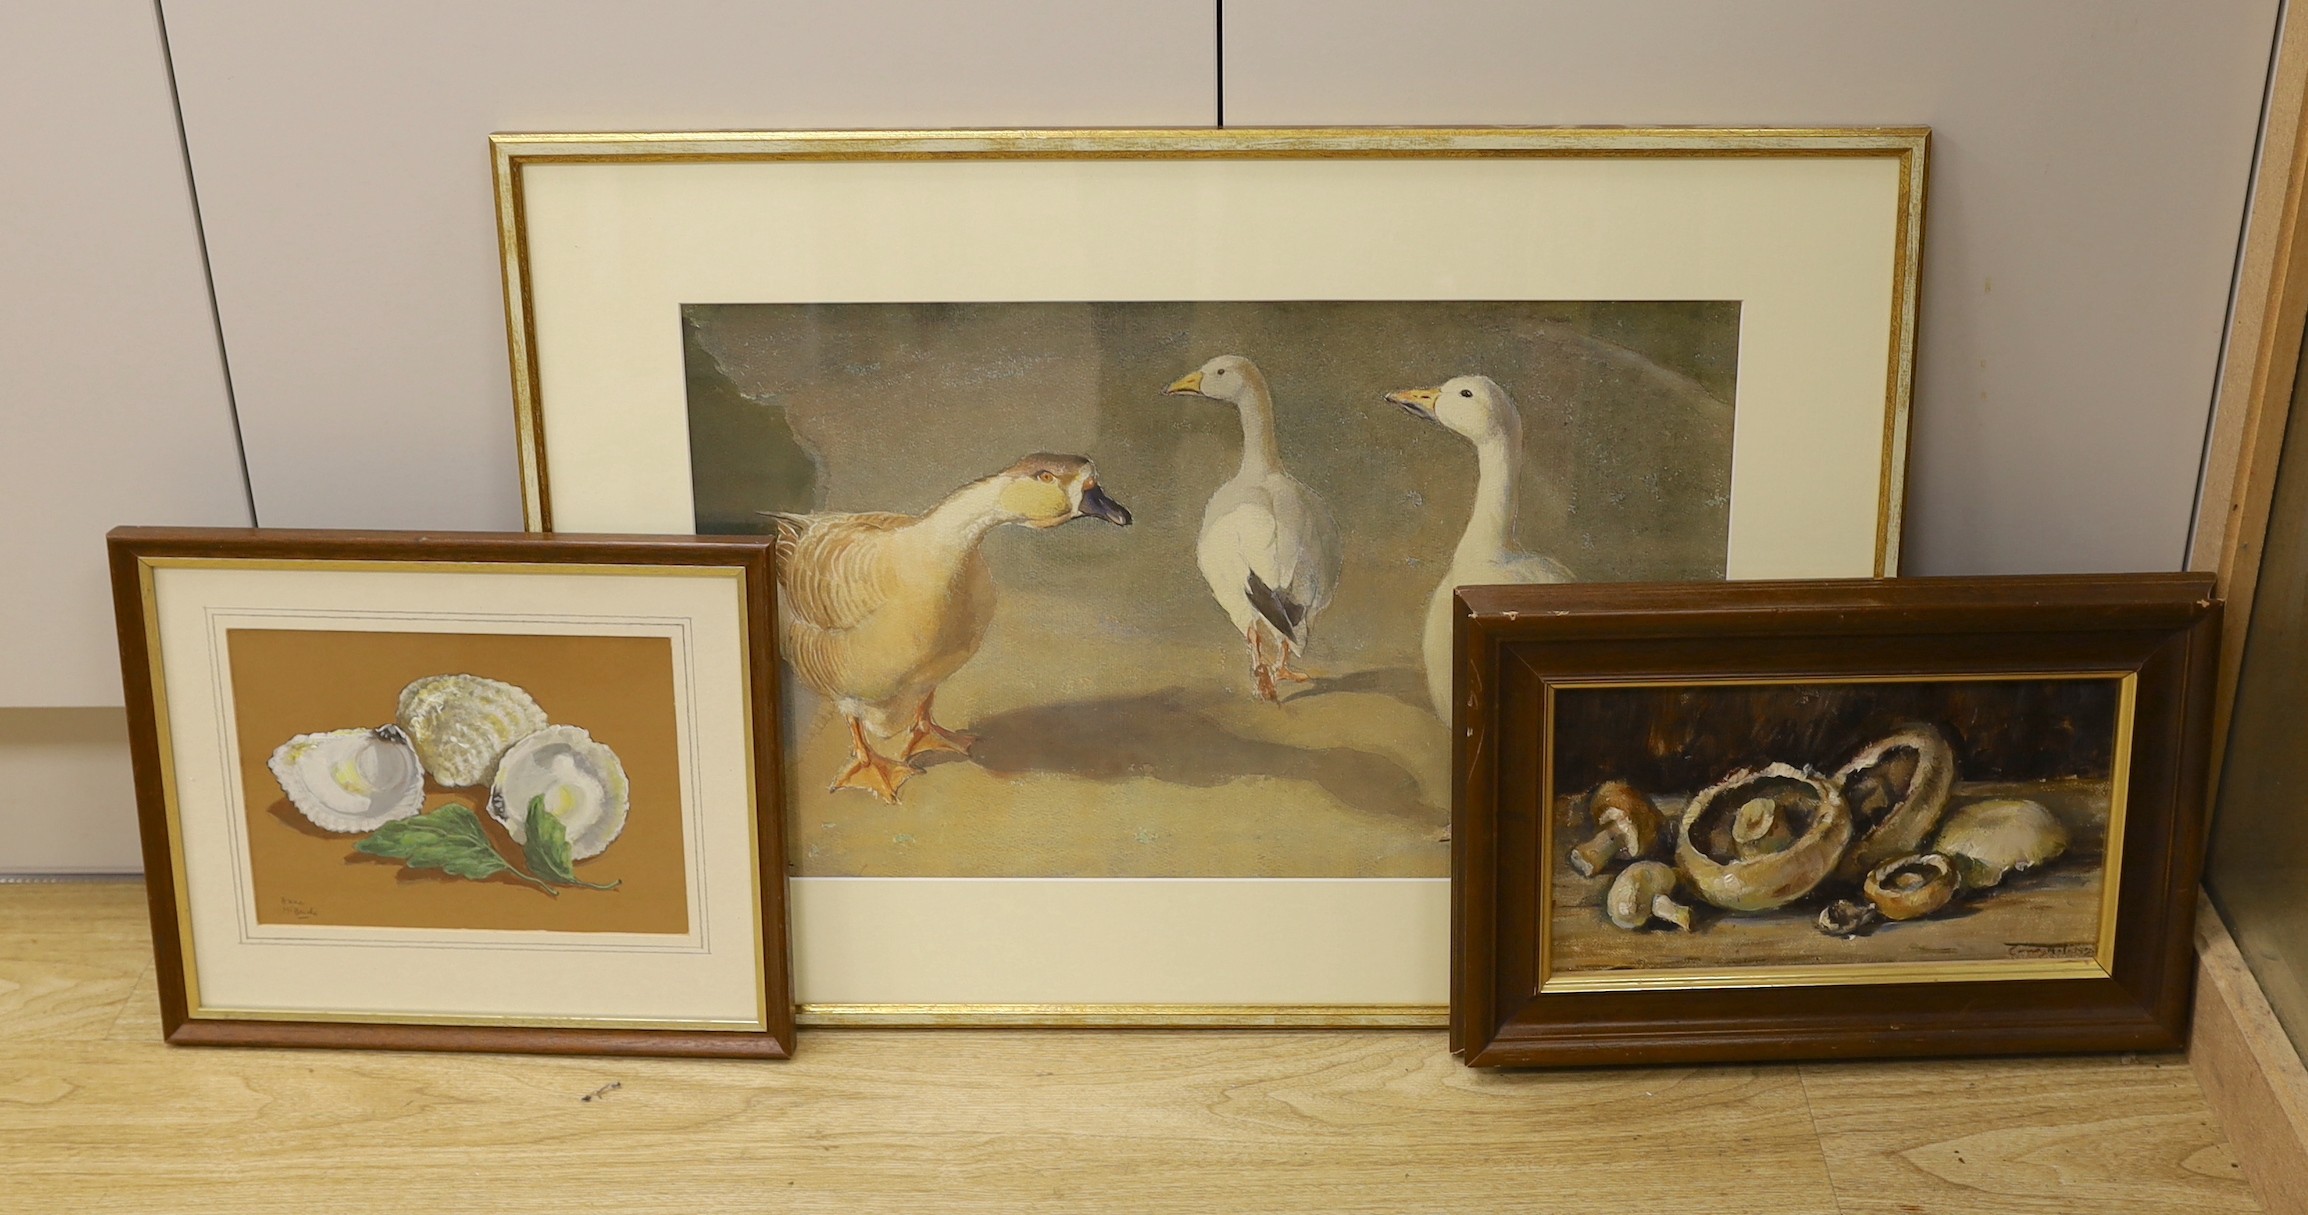 Arthur W. Gay (1901-1958), watercolour, Geese and ducks, signed, 31 x 52cm, with two small still lifes by other hands of mushrooms and oyster shells